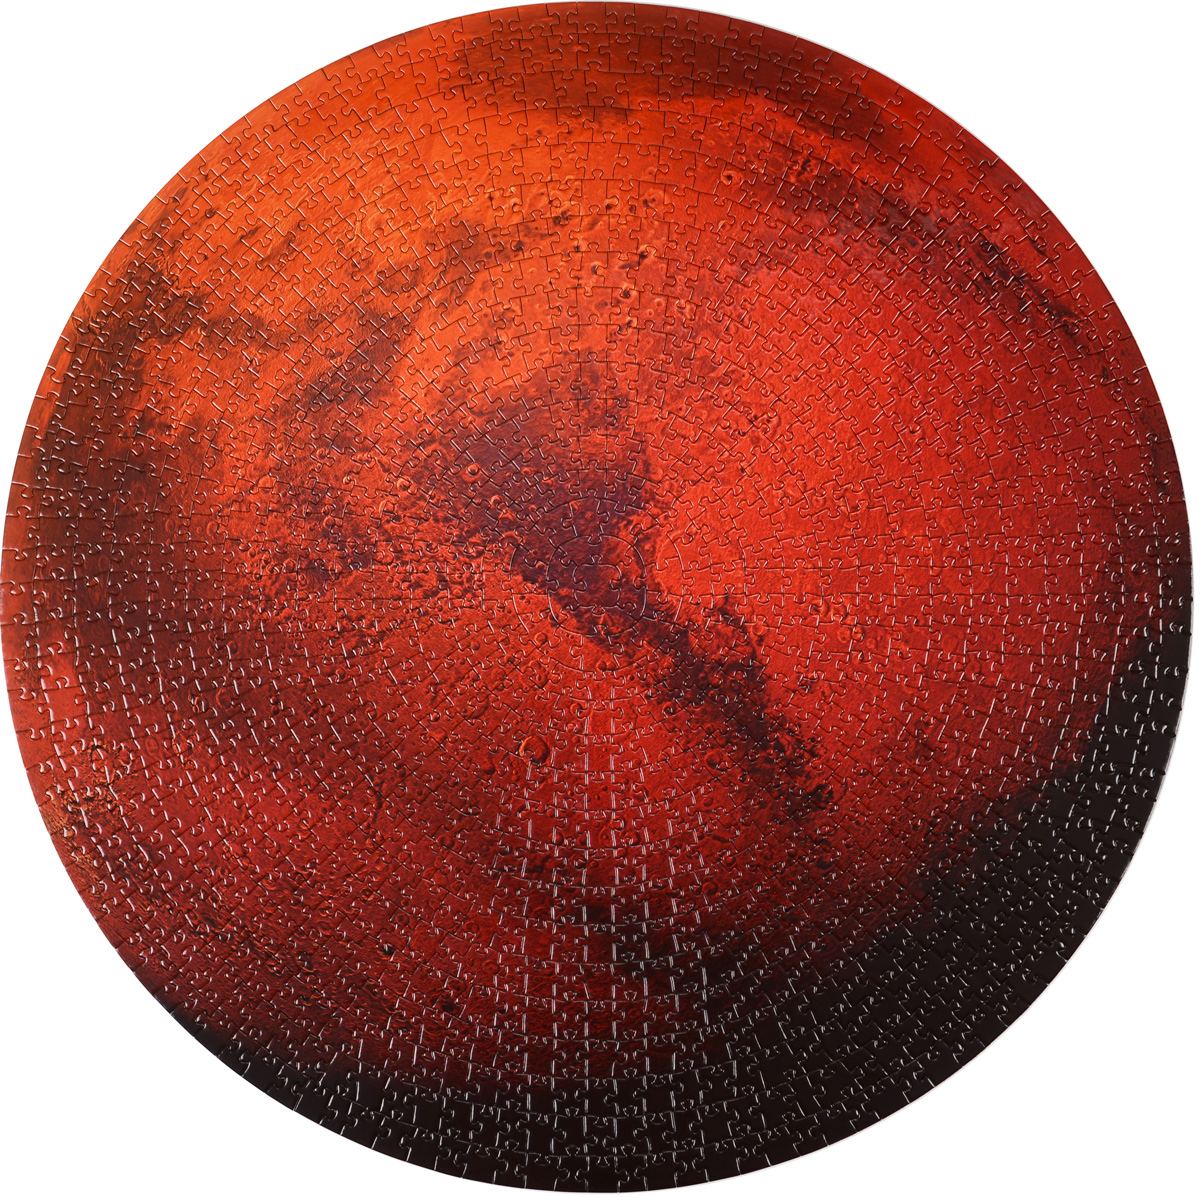 Mars Circle Jigsaw Puzzle Space Jigsaw Puzzle